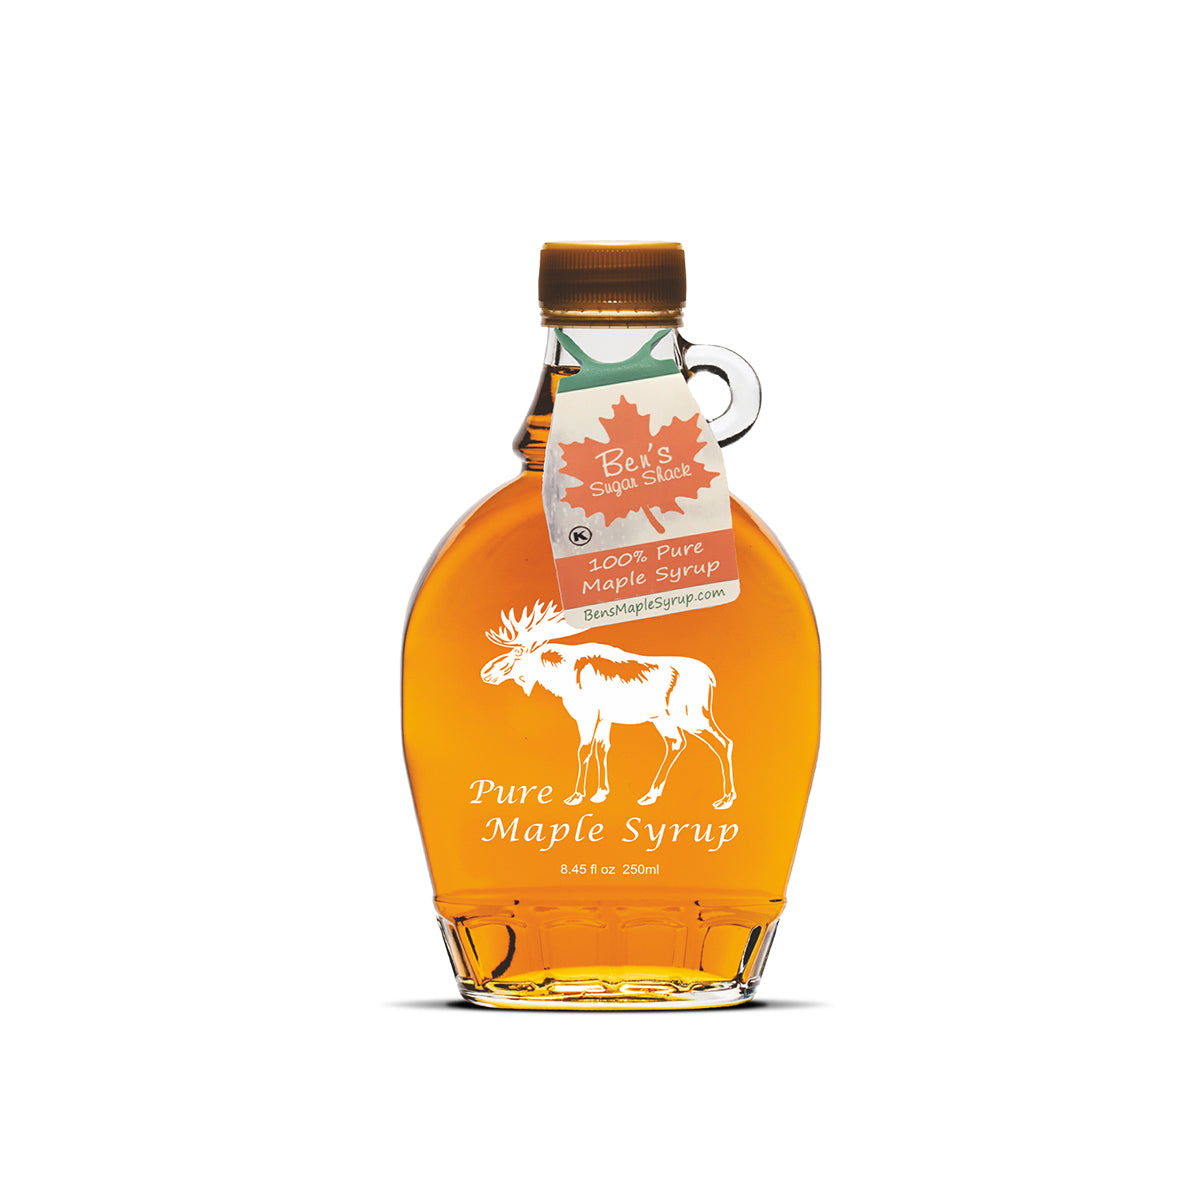 Ben's 100% Pure Maple Syrup in Moose Glass Flask 8.45 oz